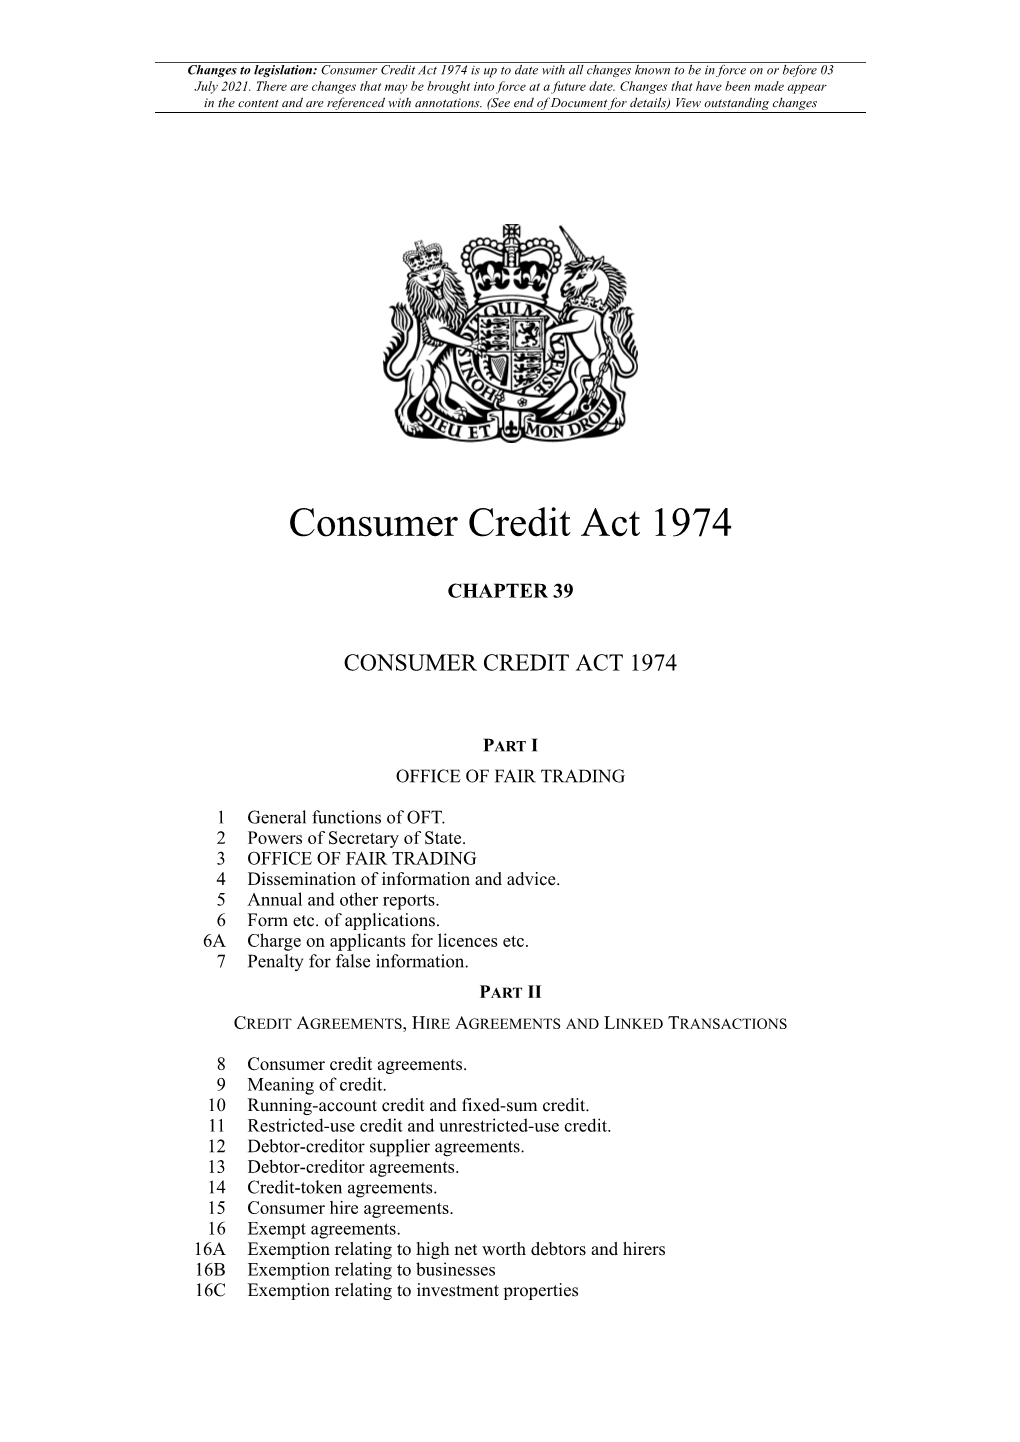 Consumer Credit Act 1974 Is up to Date with All Changes Known to Be in Force on Or Before 03 July 2021